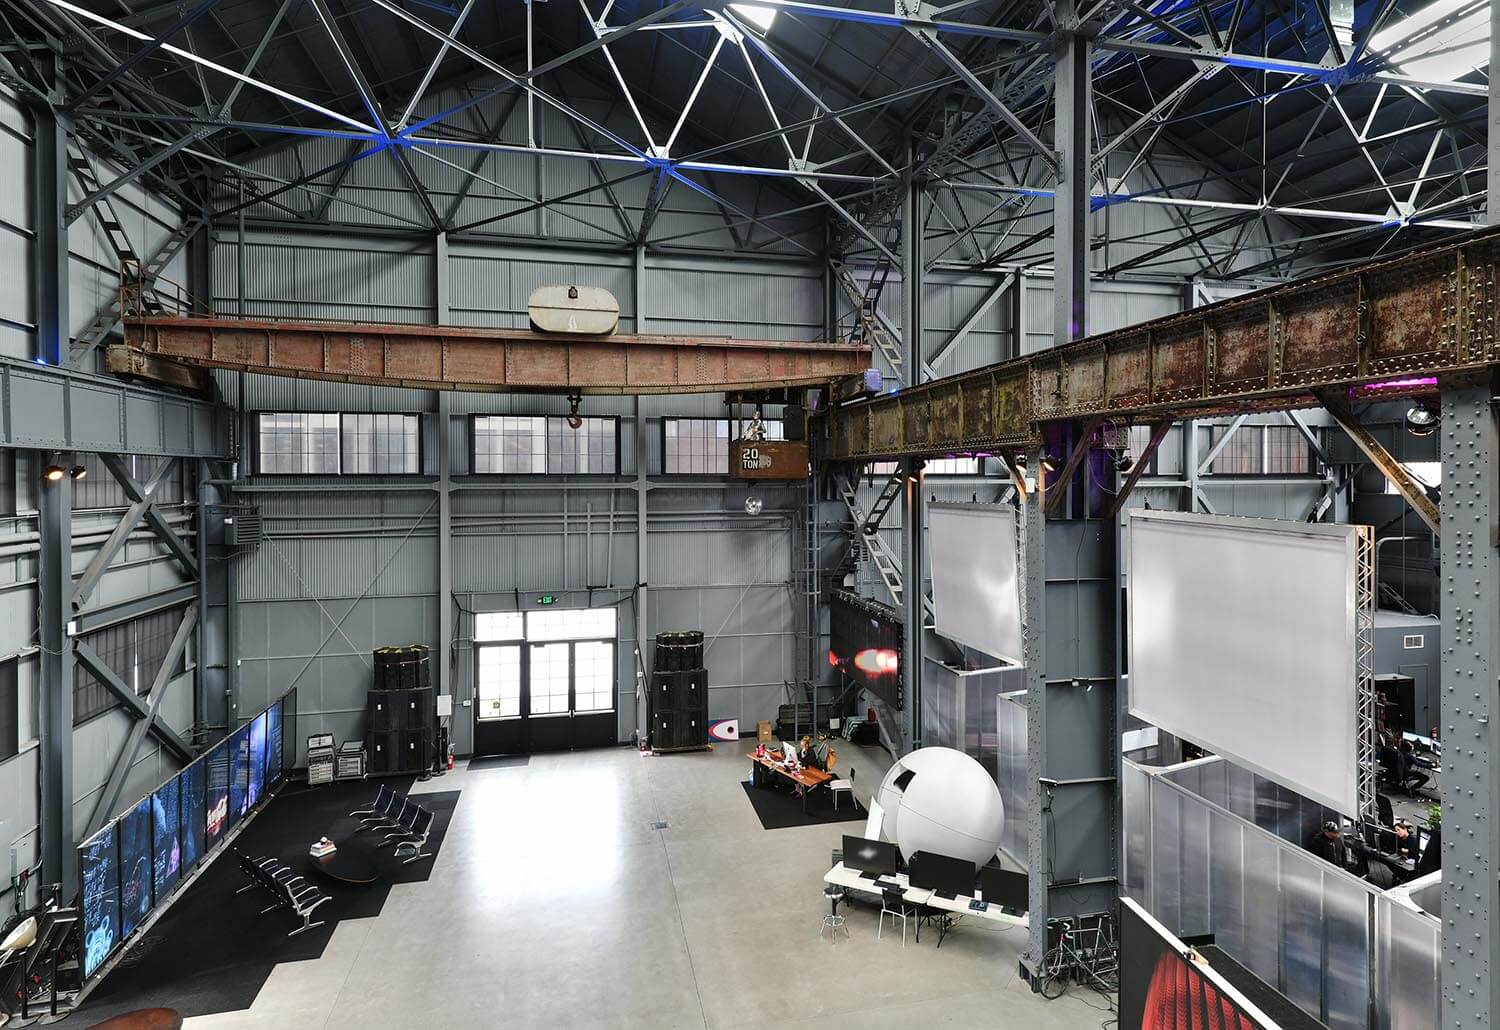 Interior view of spacious, open room at at Pier 70, Building 14 in San Francisco with metal walls and massive overhead crane